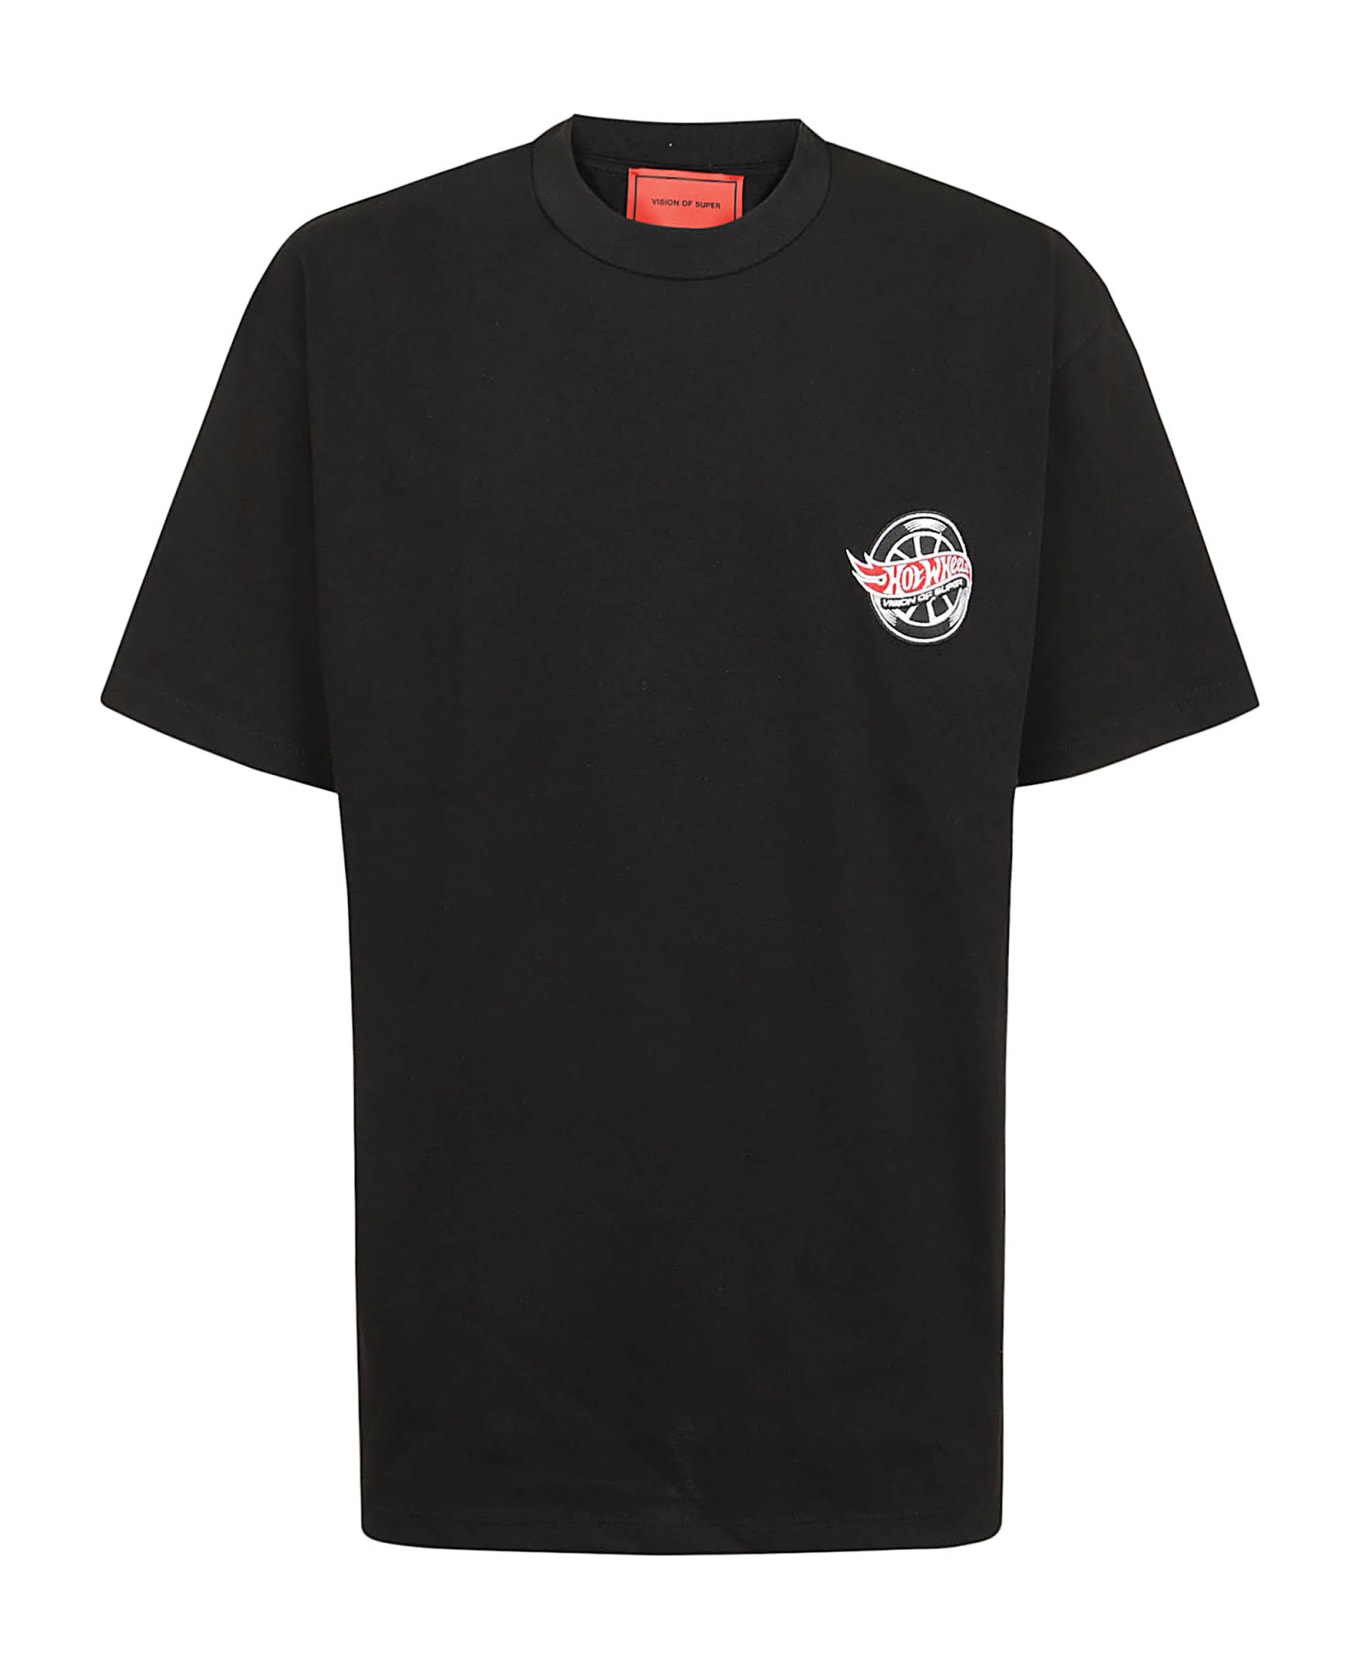 Vision of Super Black T-shirt With Iconic Wheel Print - Black